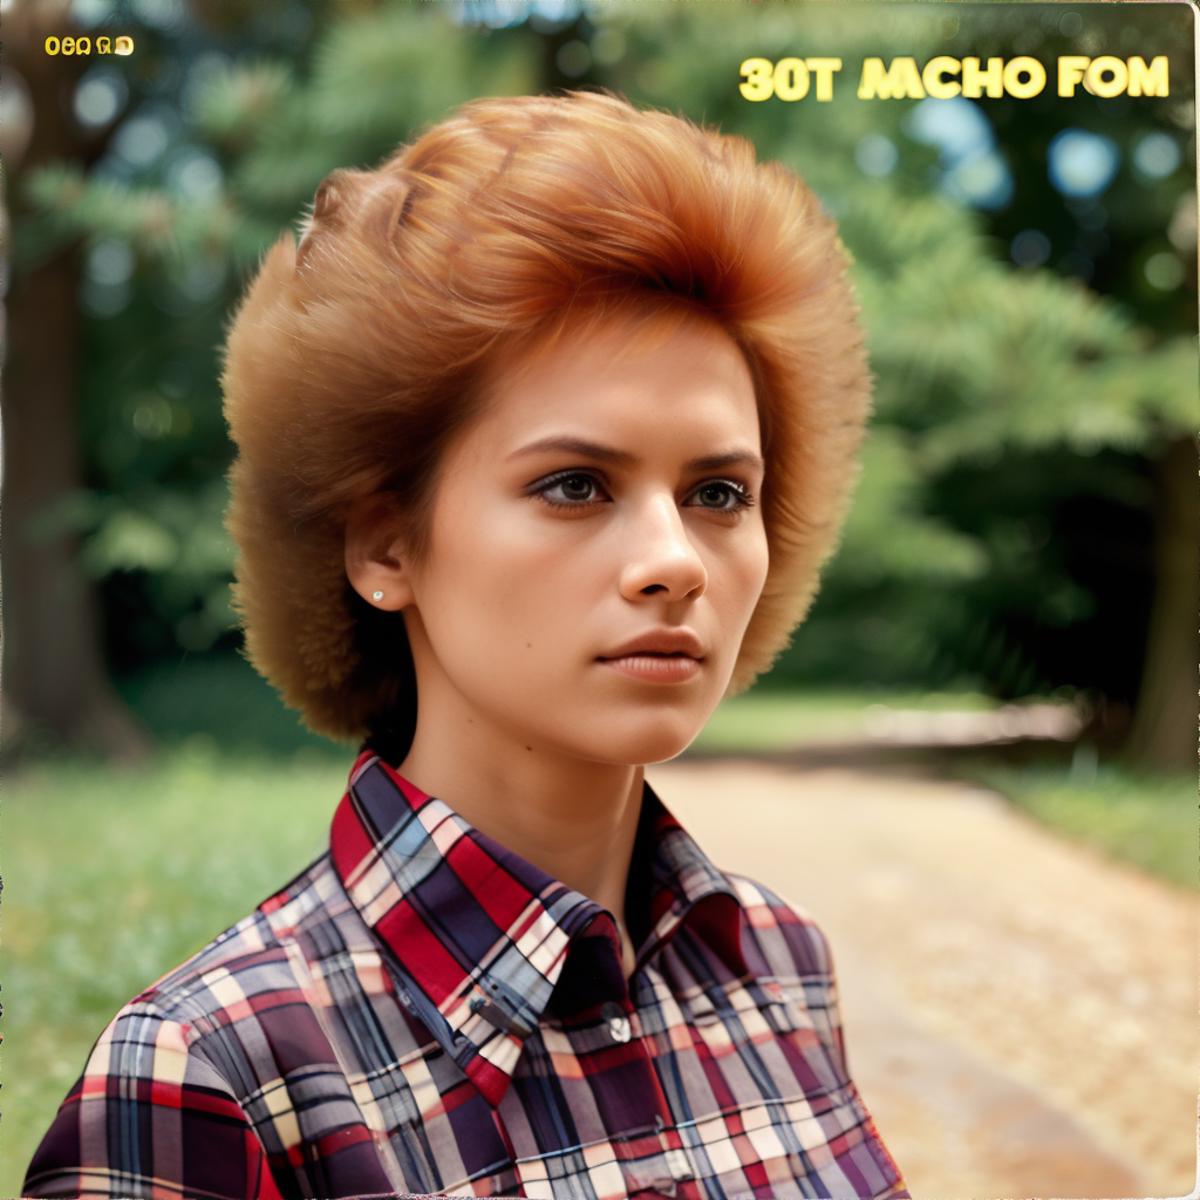 Bad Haircut Vinyl Record Covers image by bzlibby